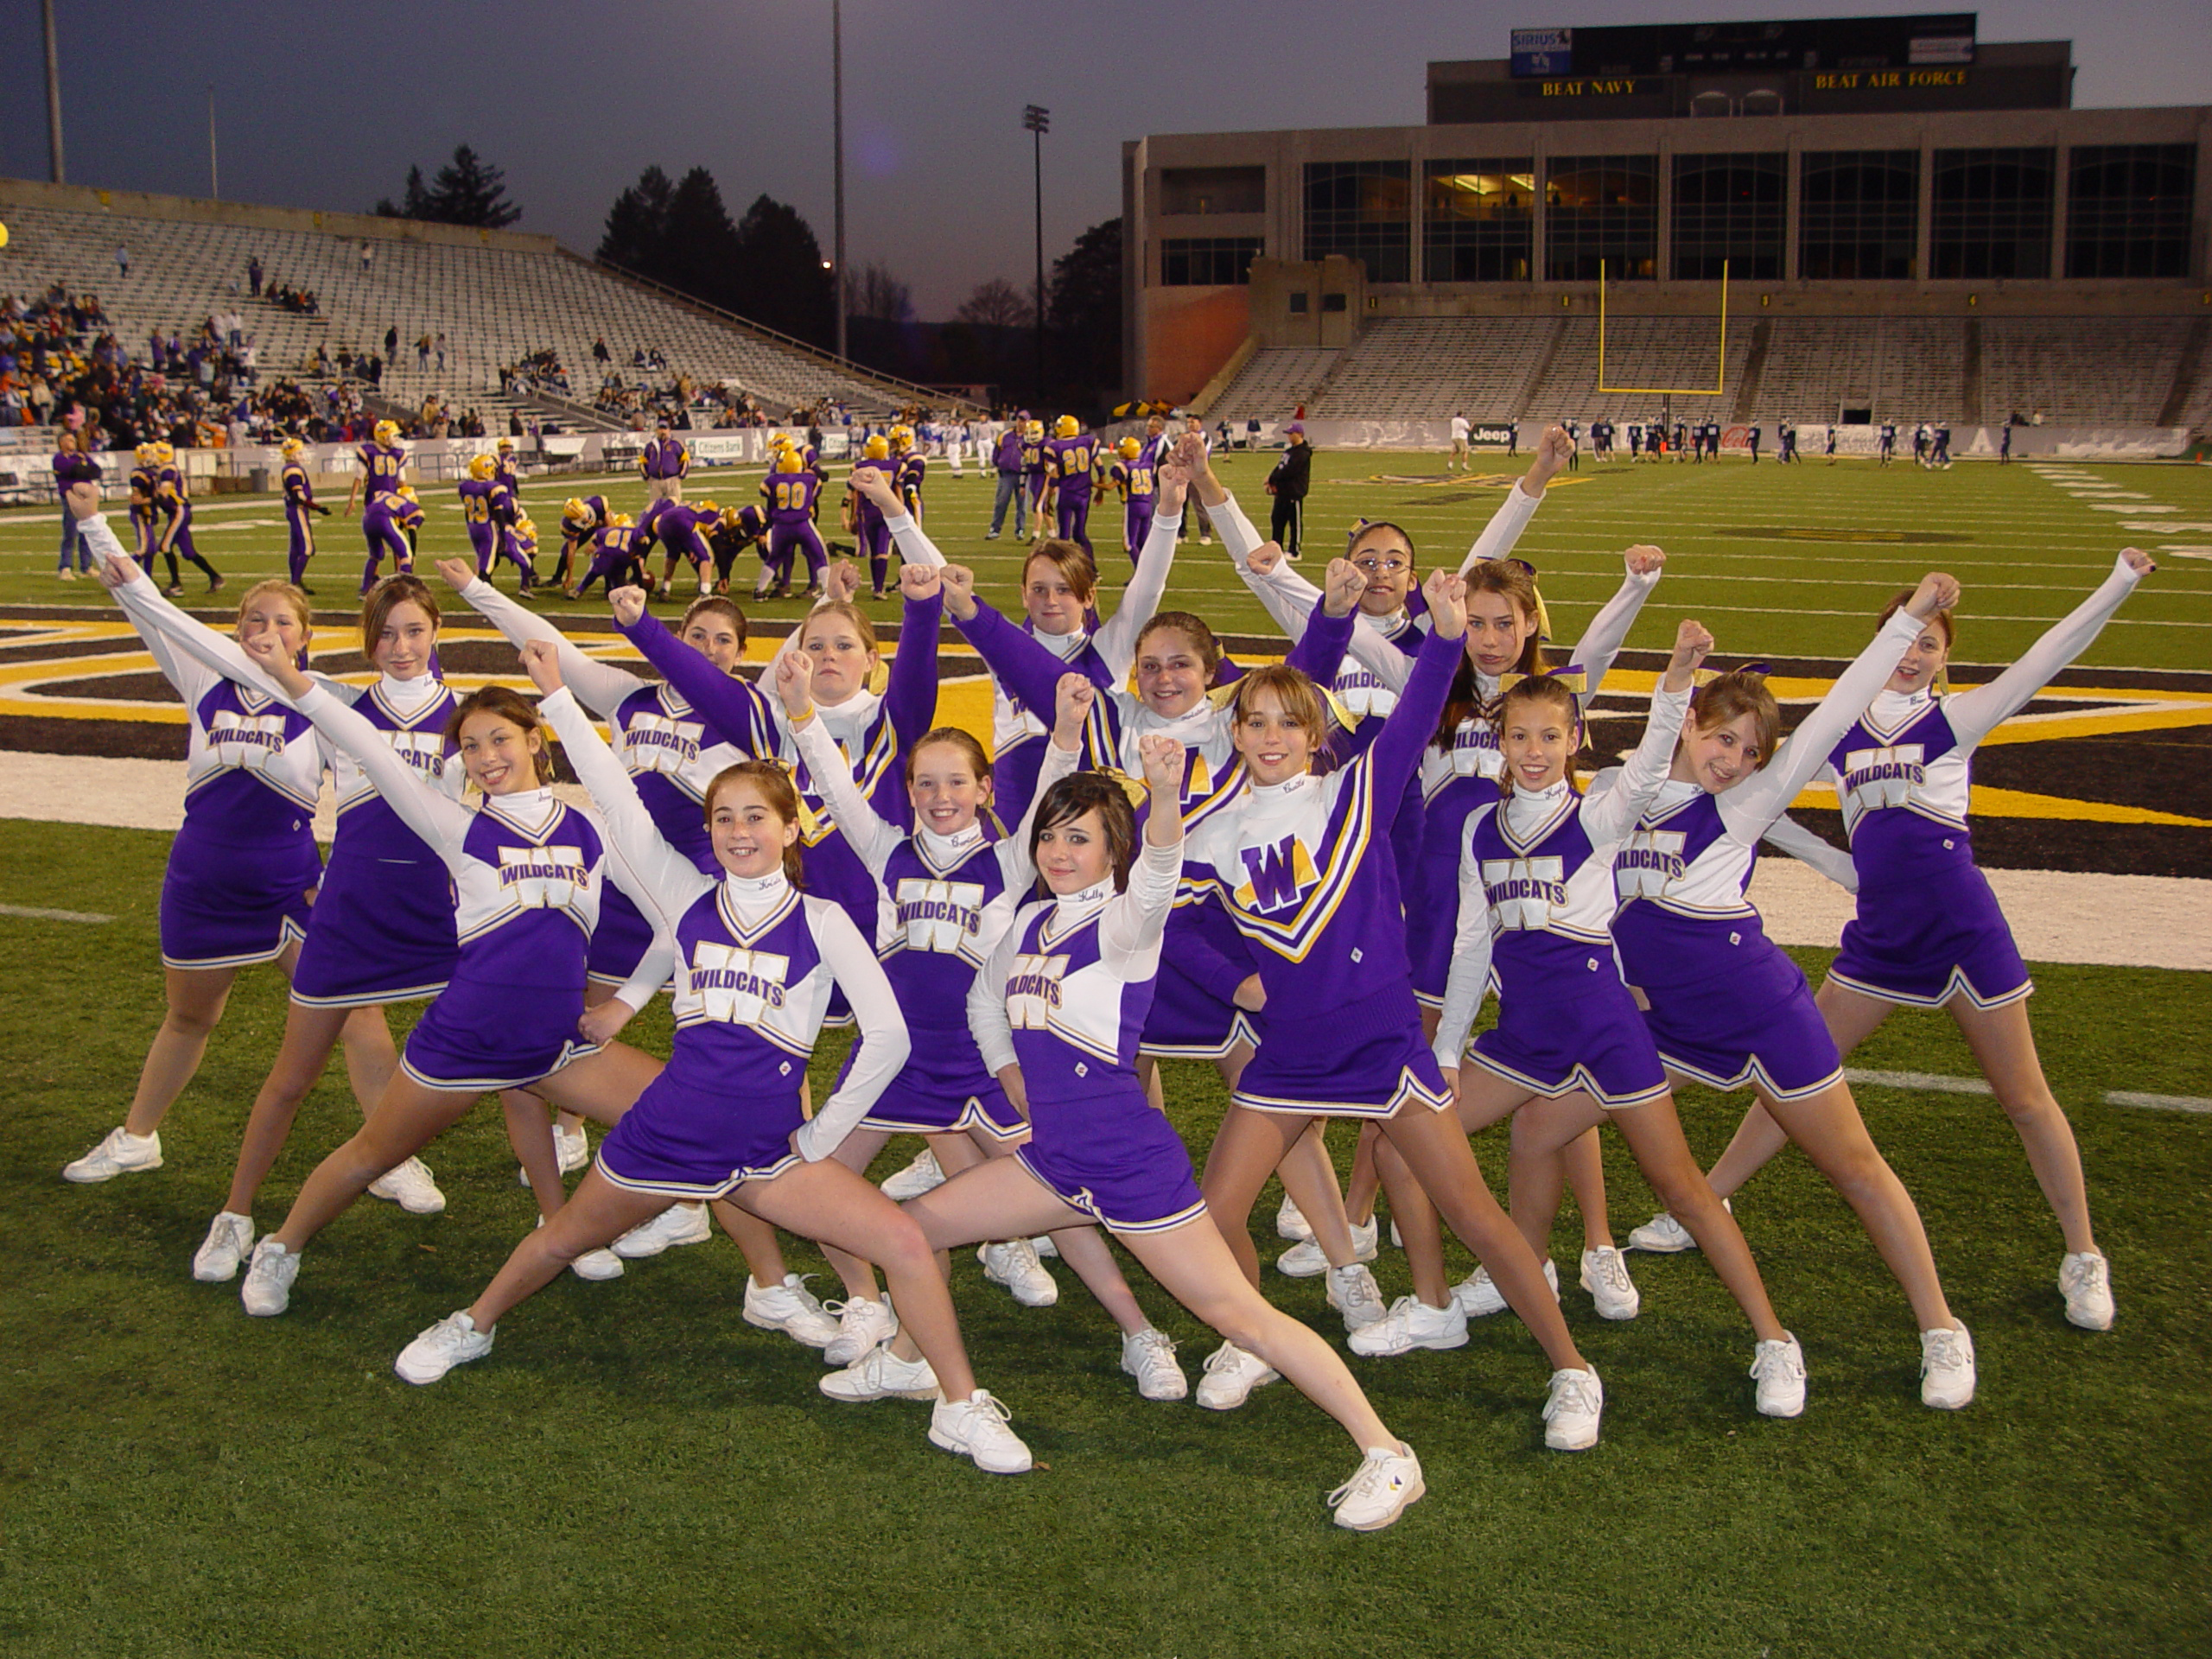 cheer squad - group picture, image by tag - keywordpictures.com